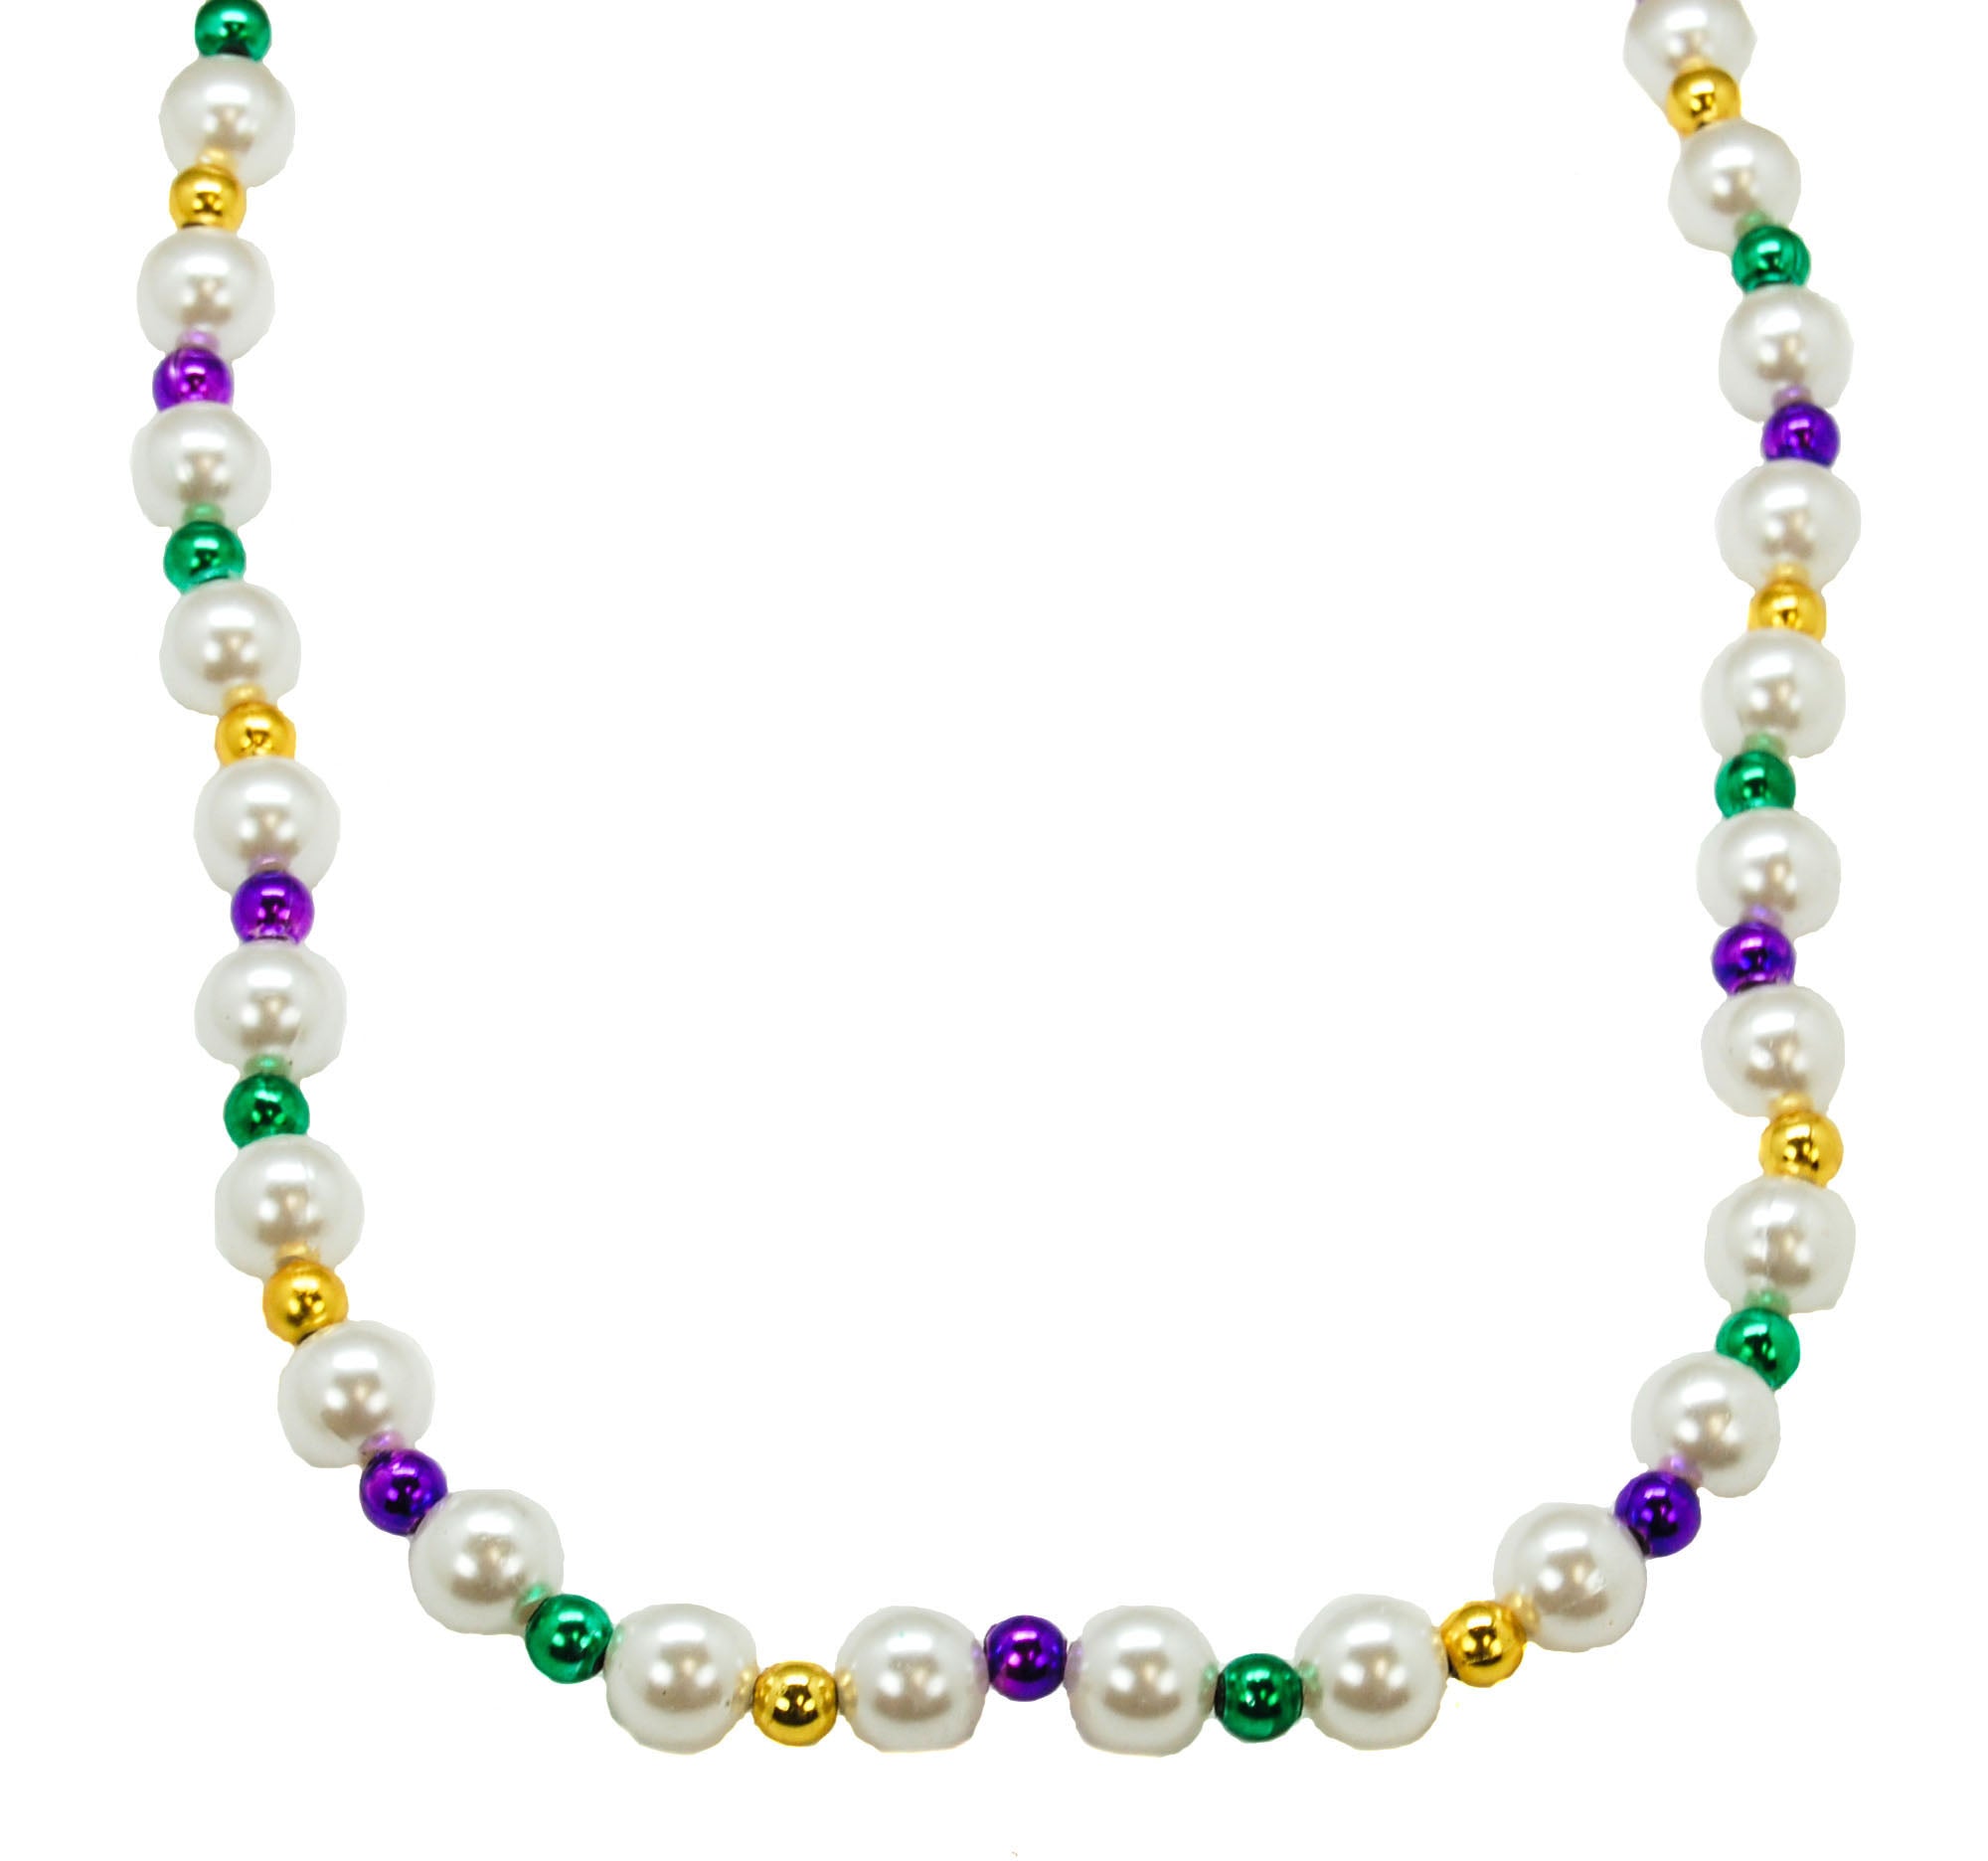 42" 14mm White Pearl Bead with Purple, Green and Gold Spacers